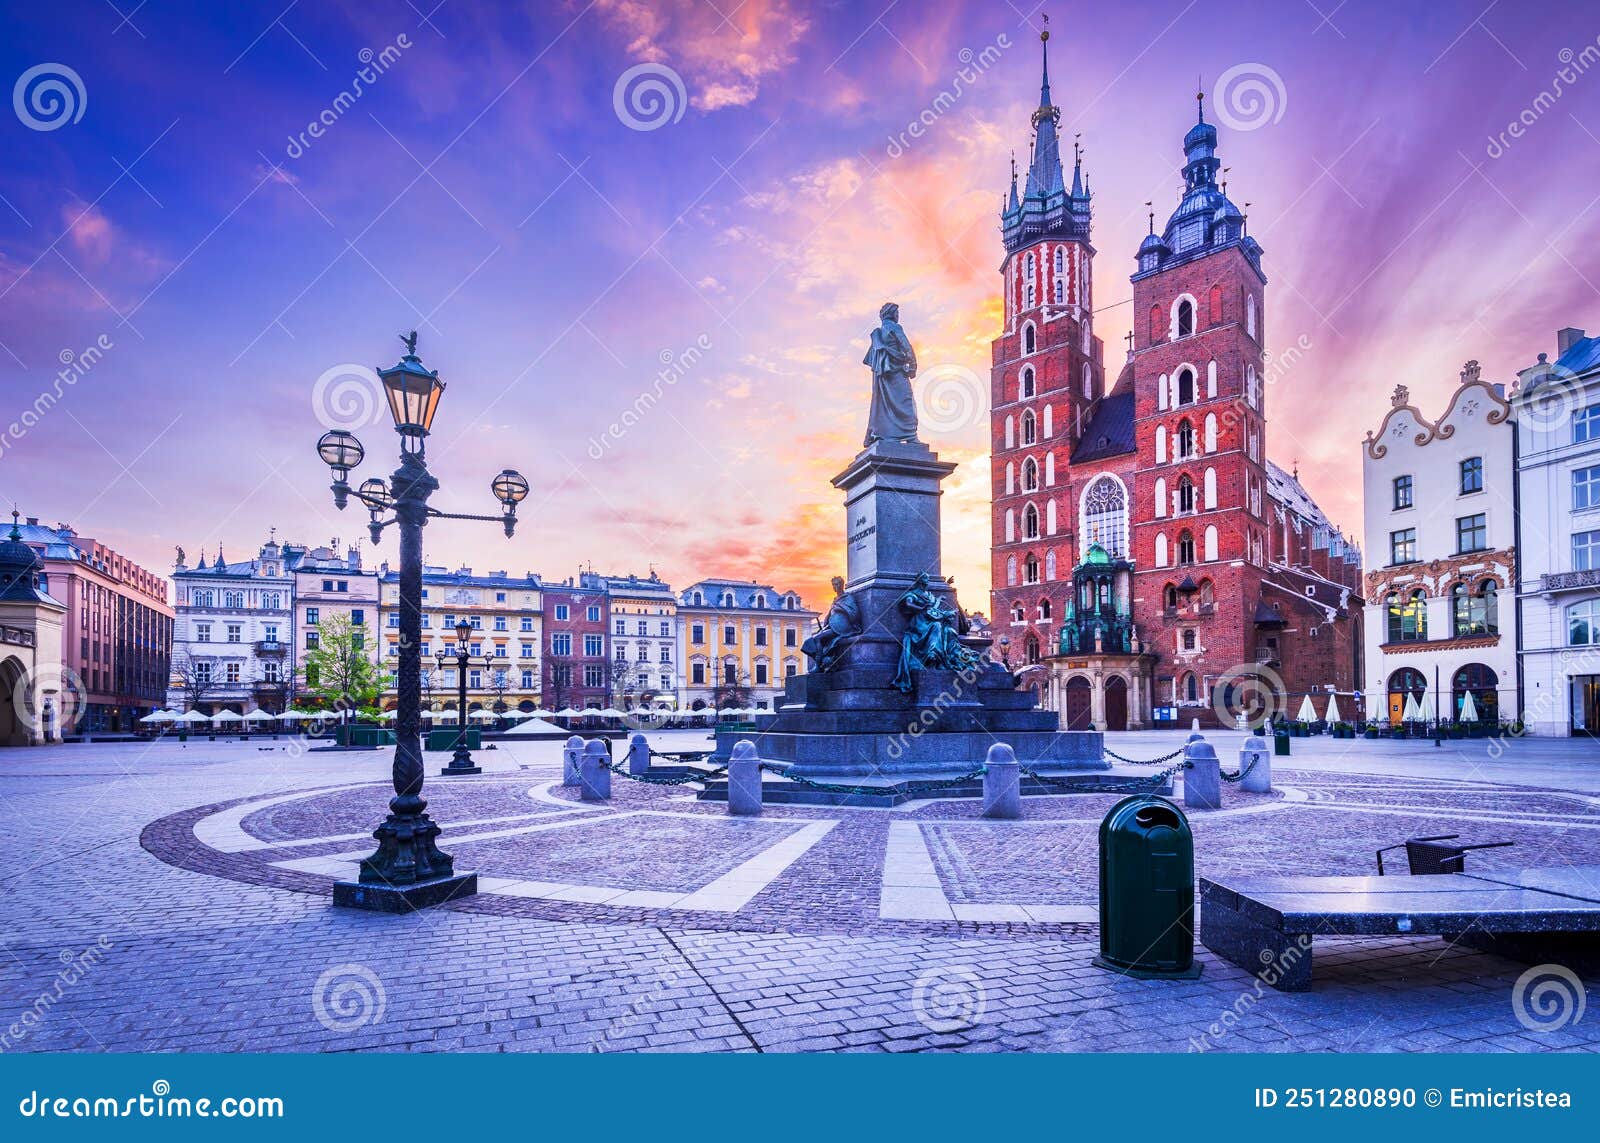 krakow, poland - medieval ryenek square with the cathedral